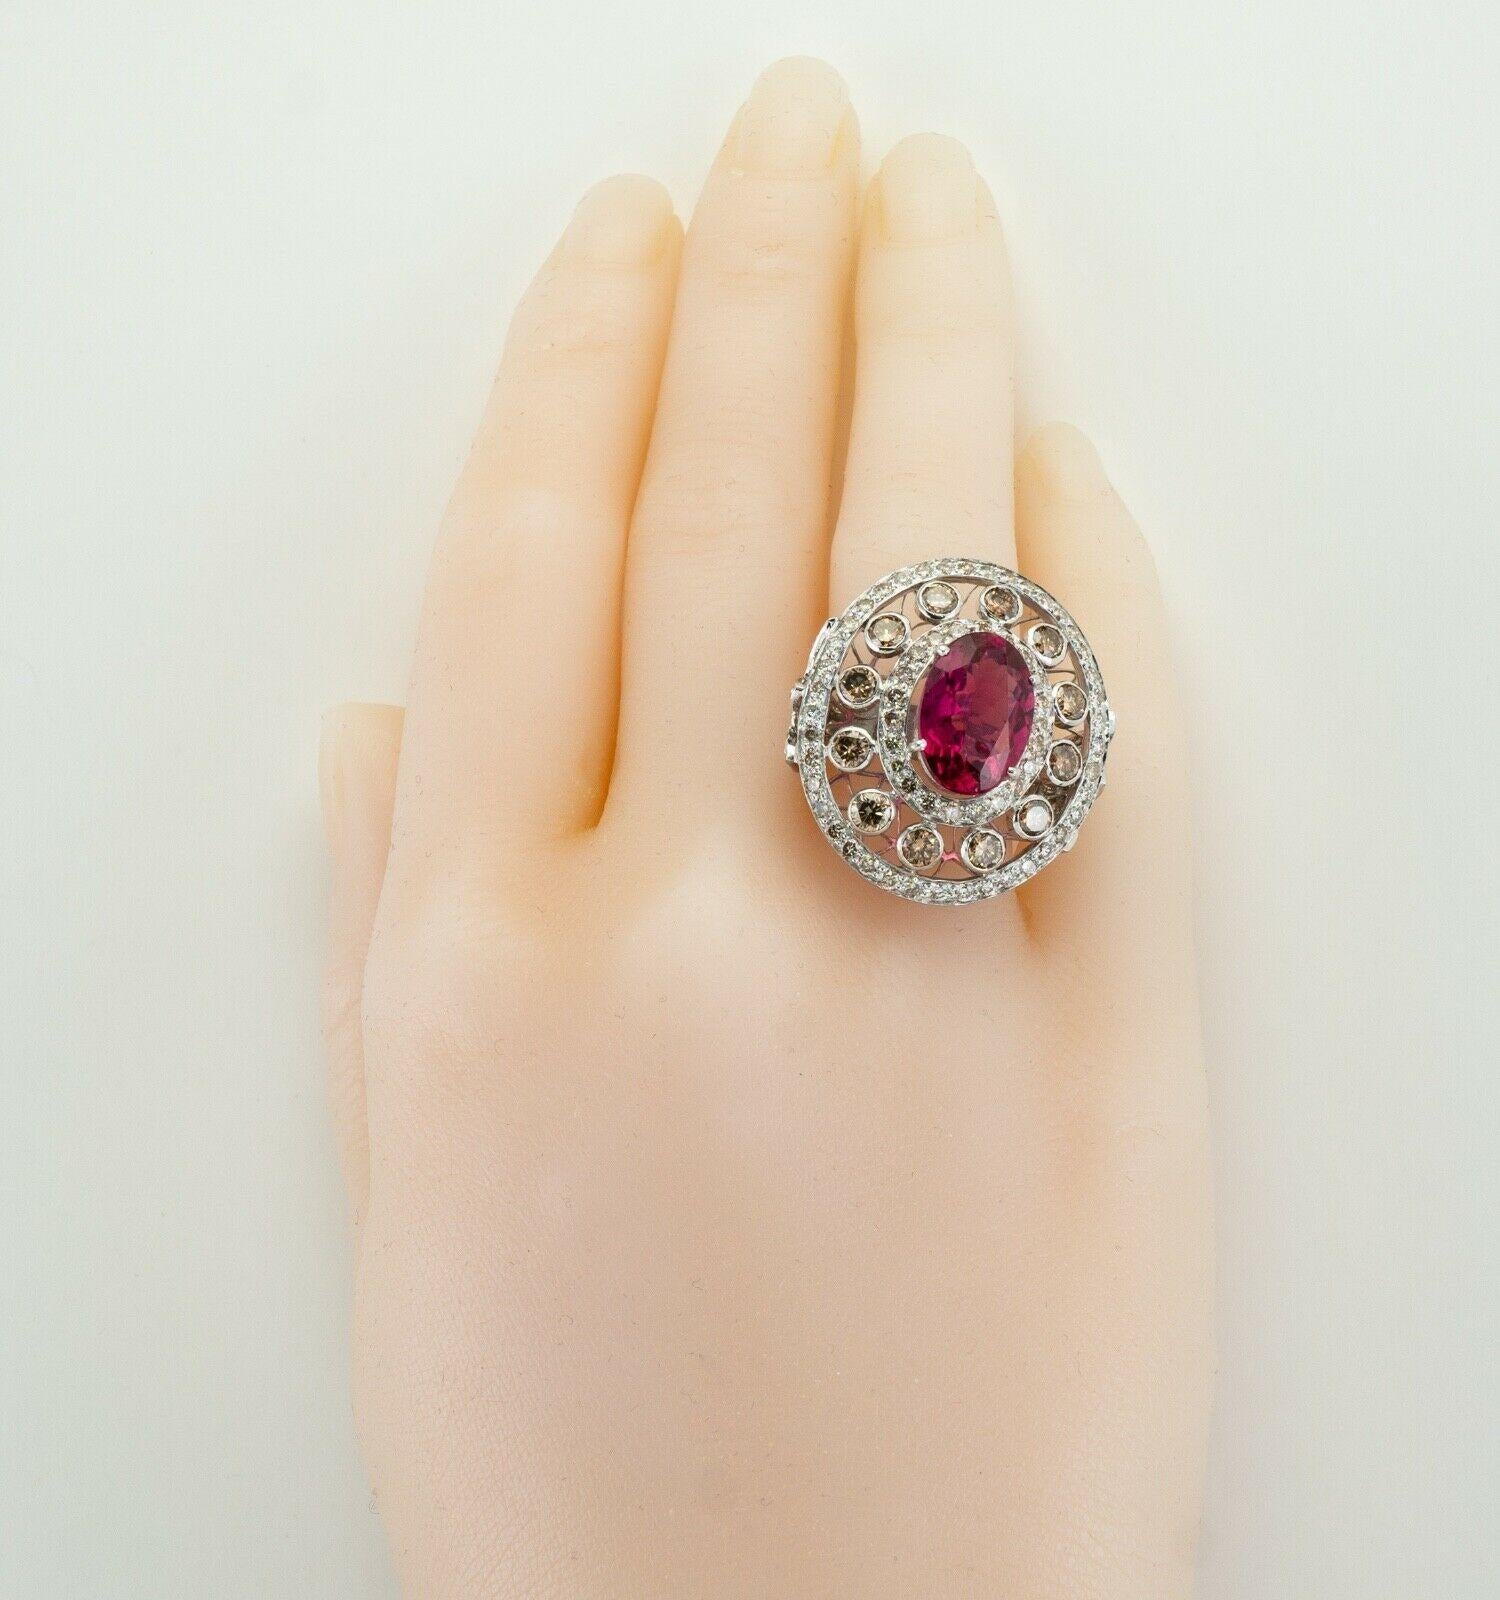 Diamond Rubellite Pink Tourmaline Ring Oval 18K White Gold In Good Condition For Sale In East Brunswick, NJ